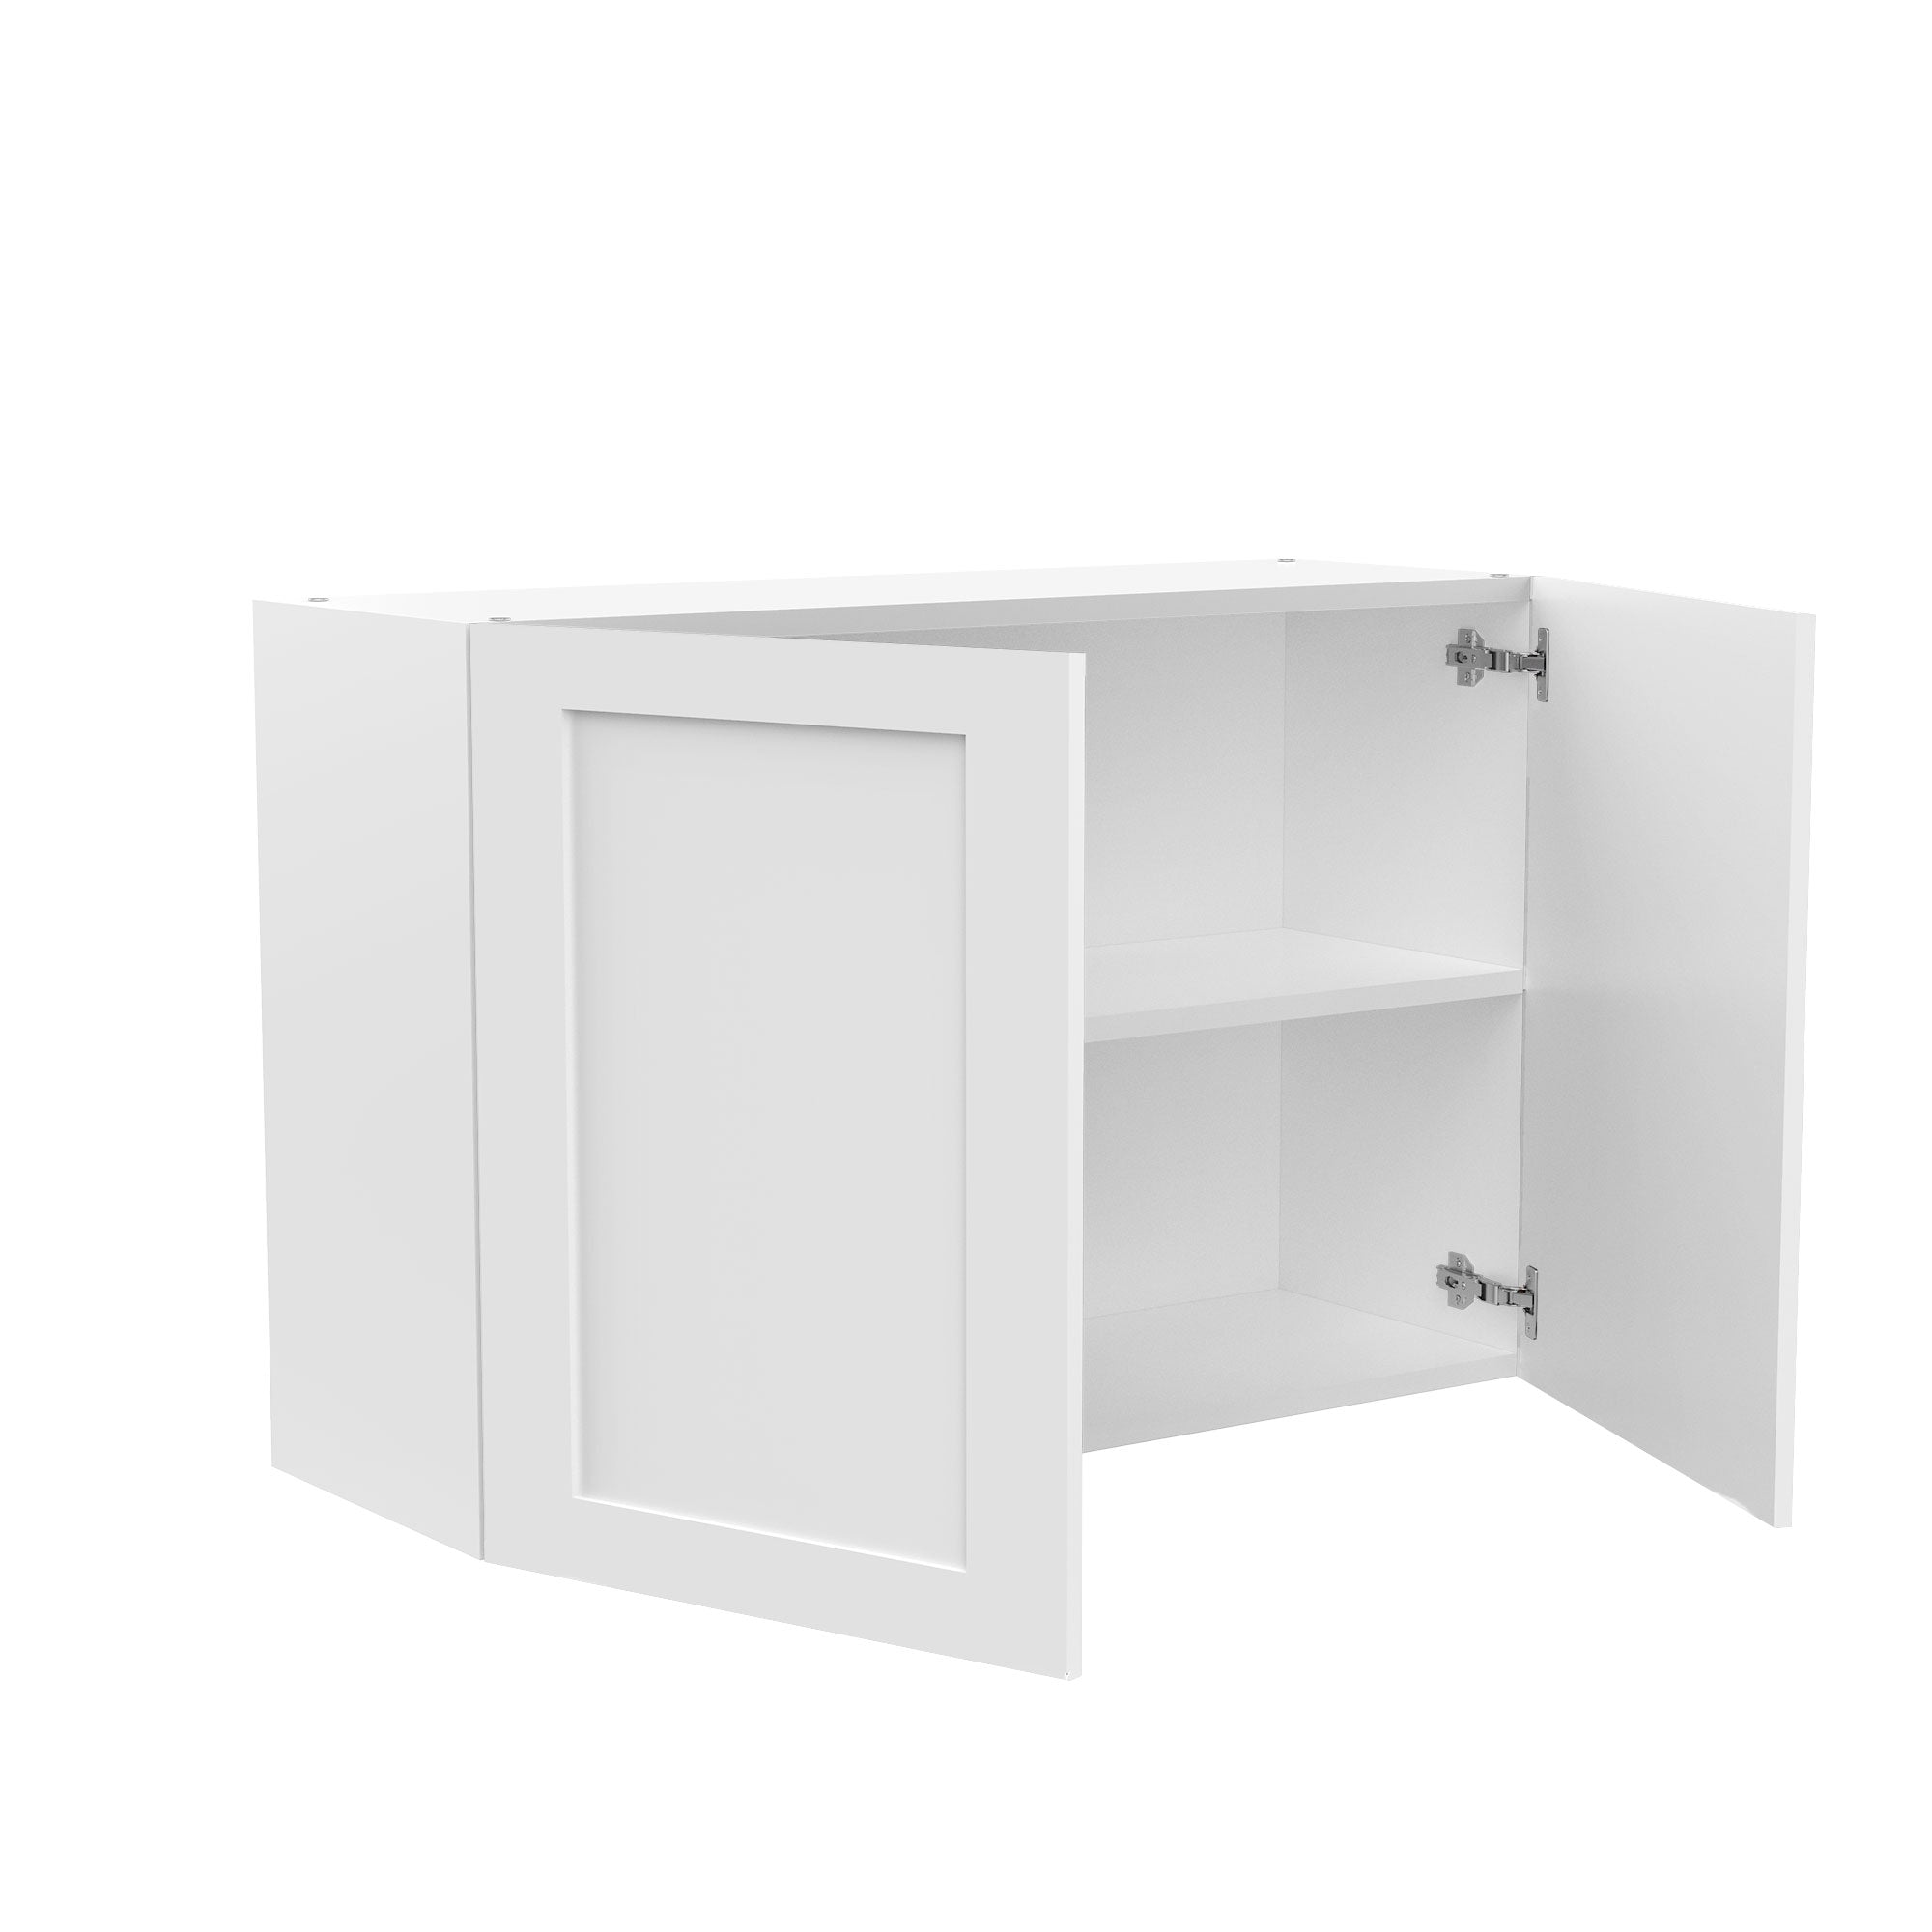 RTA - White Shaker - Double Door Wall Cabinets | 36"W x 24"H x 12"D